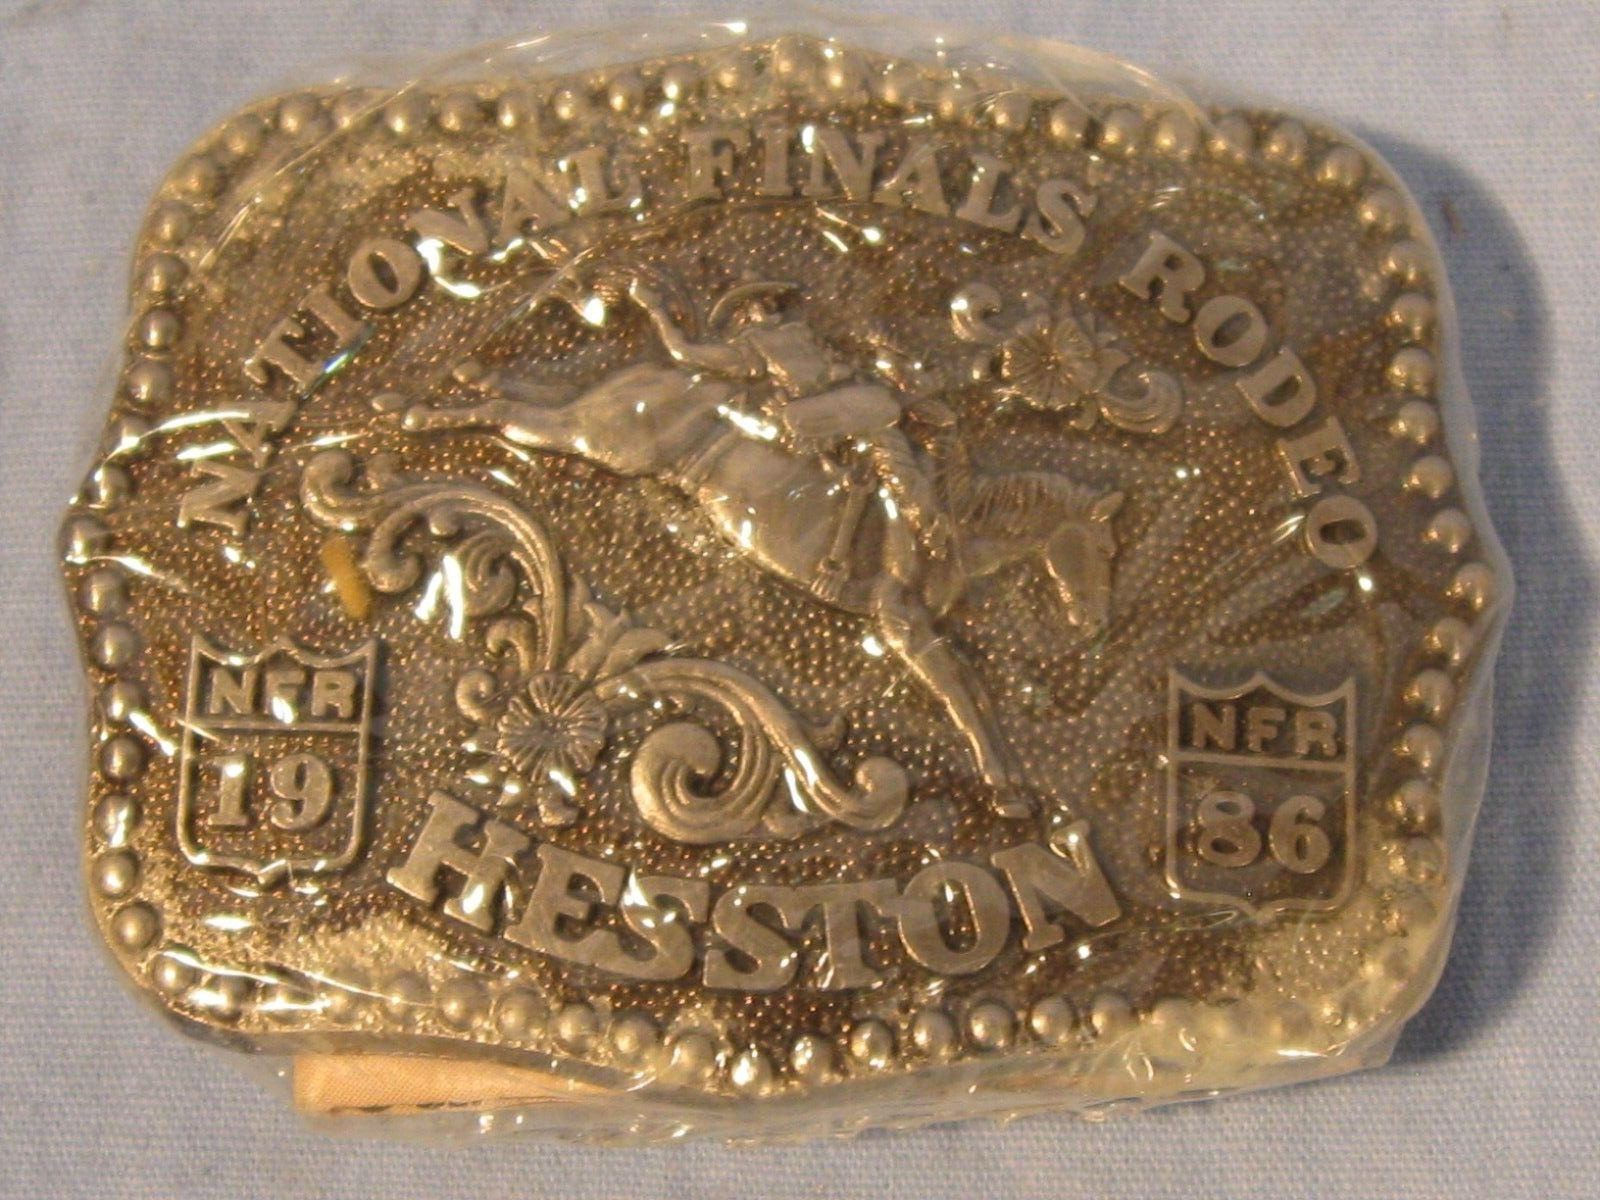 Vintage  1986 Hesston NFR Rodeo Bare Back Youth Buckle